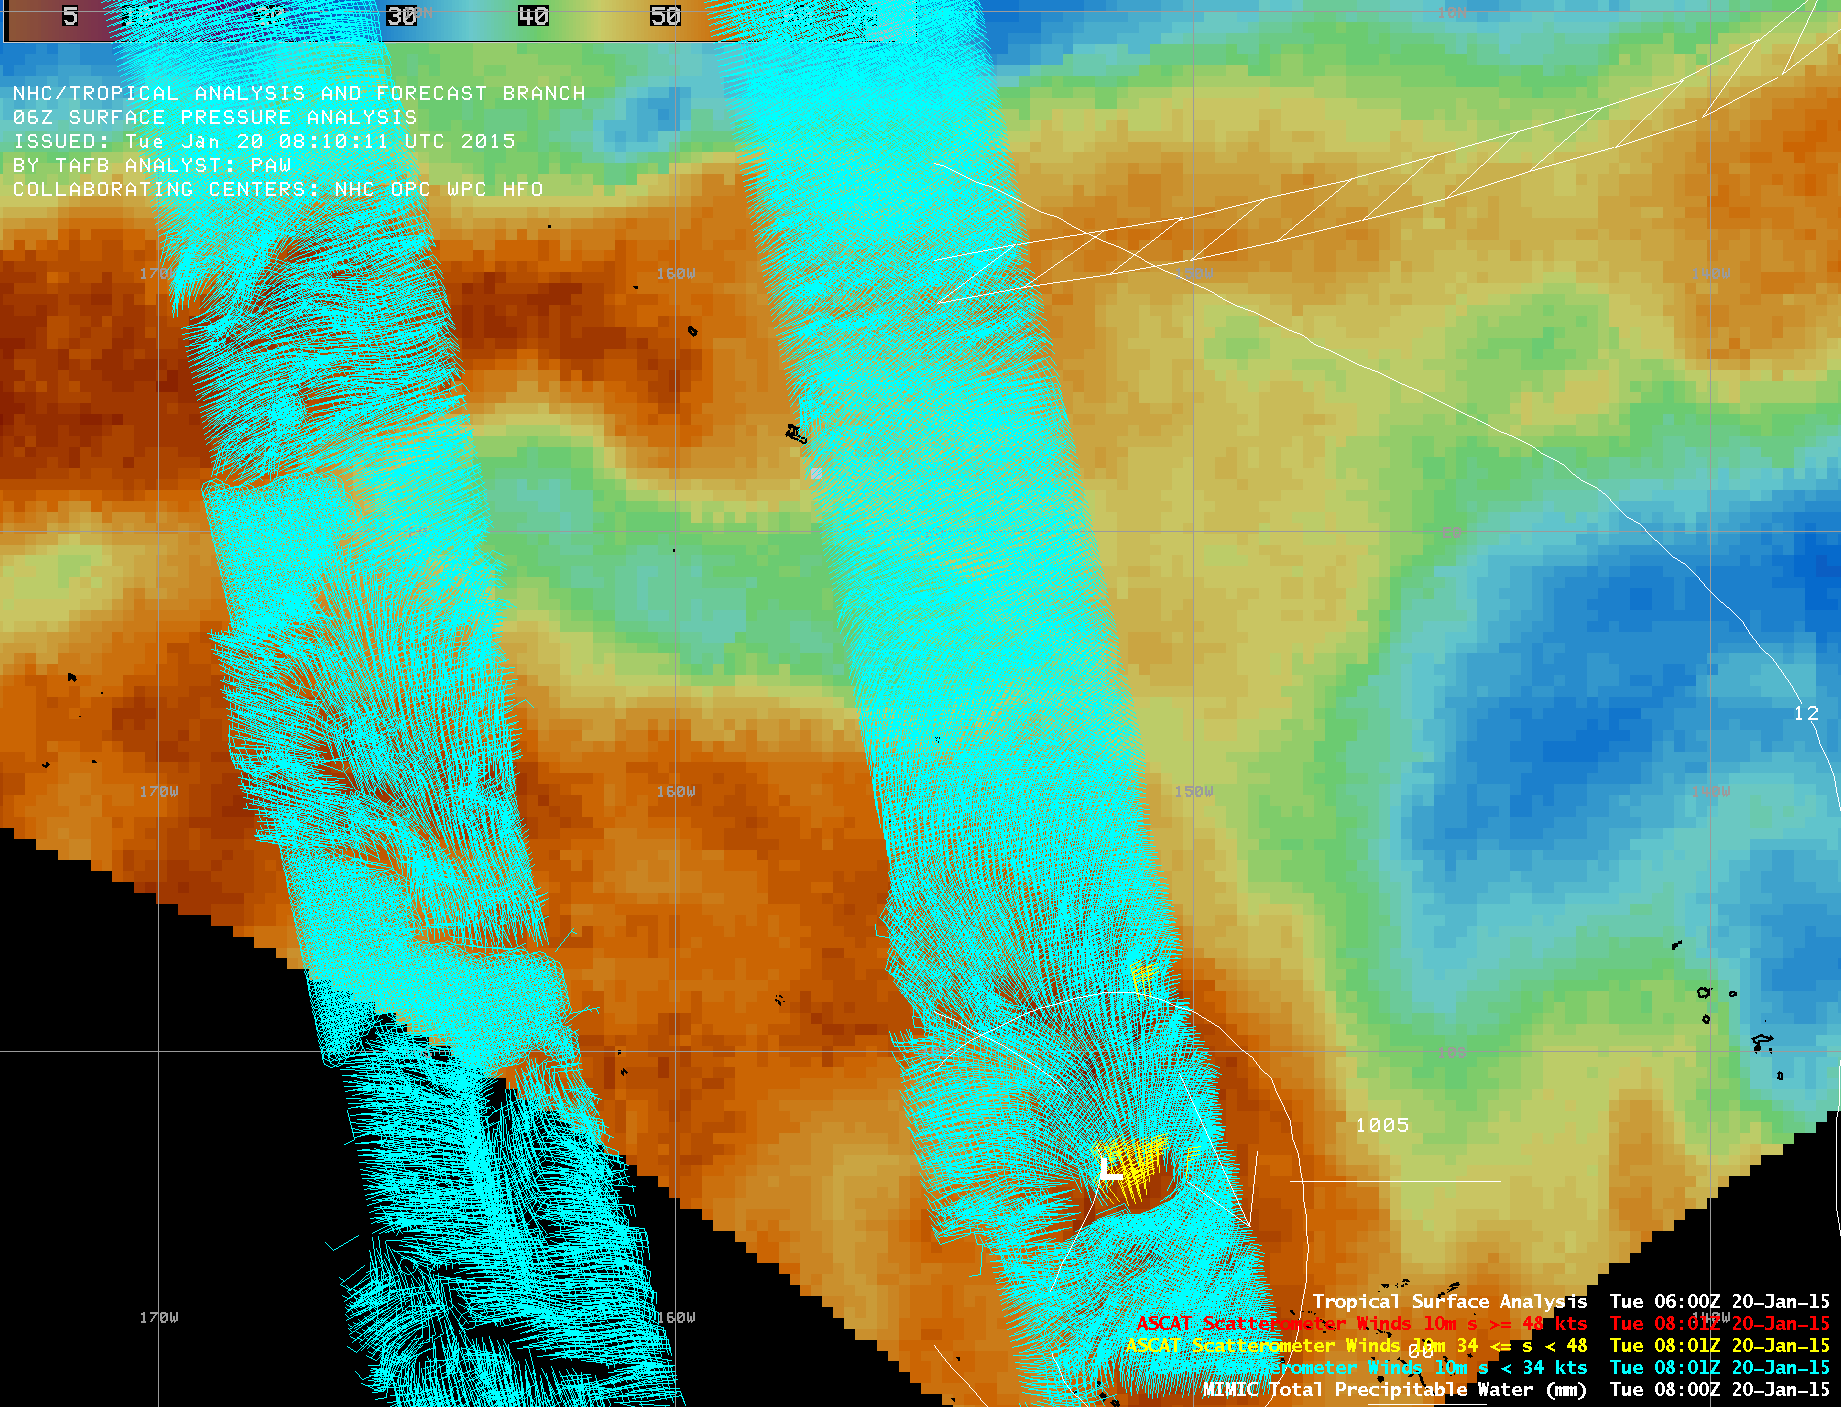 MIMIC TPW product, with Metop ASCAT surface scatterometer winds